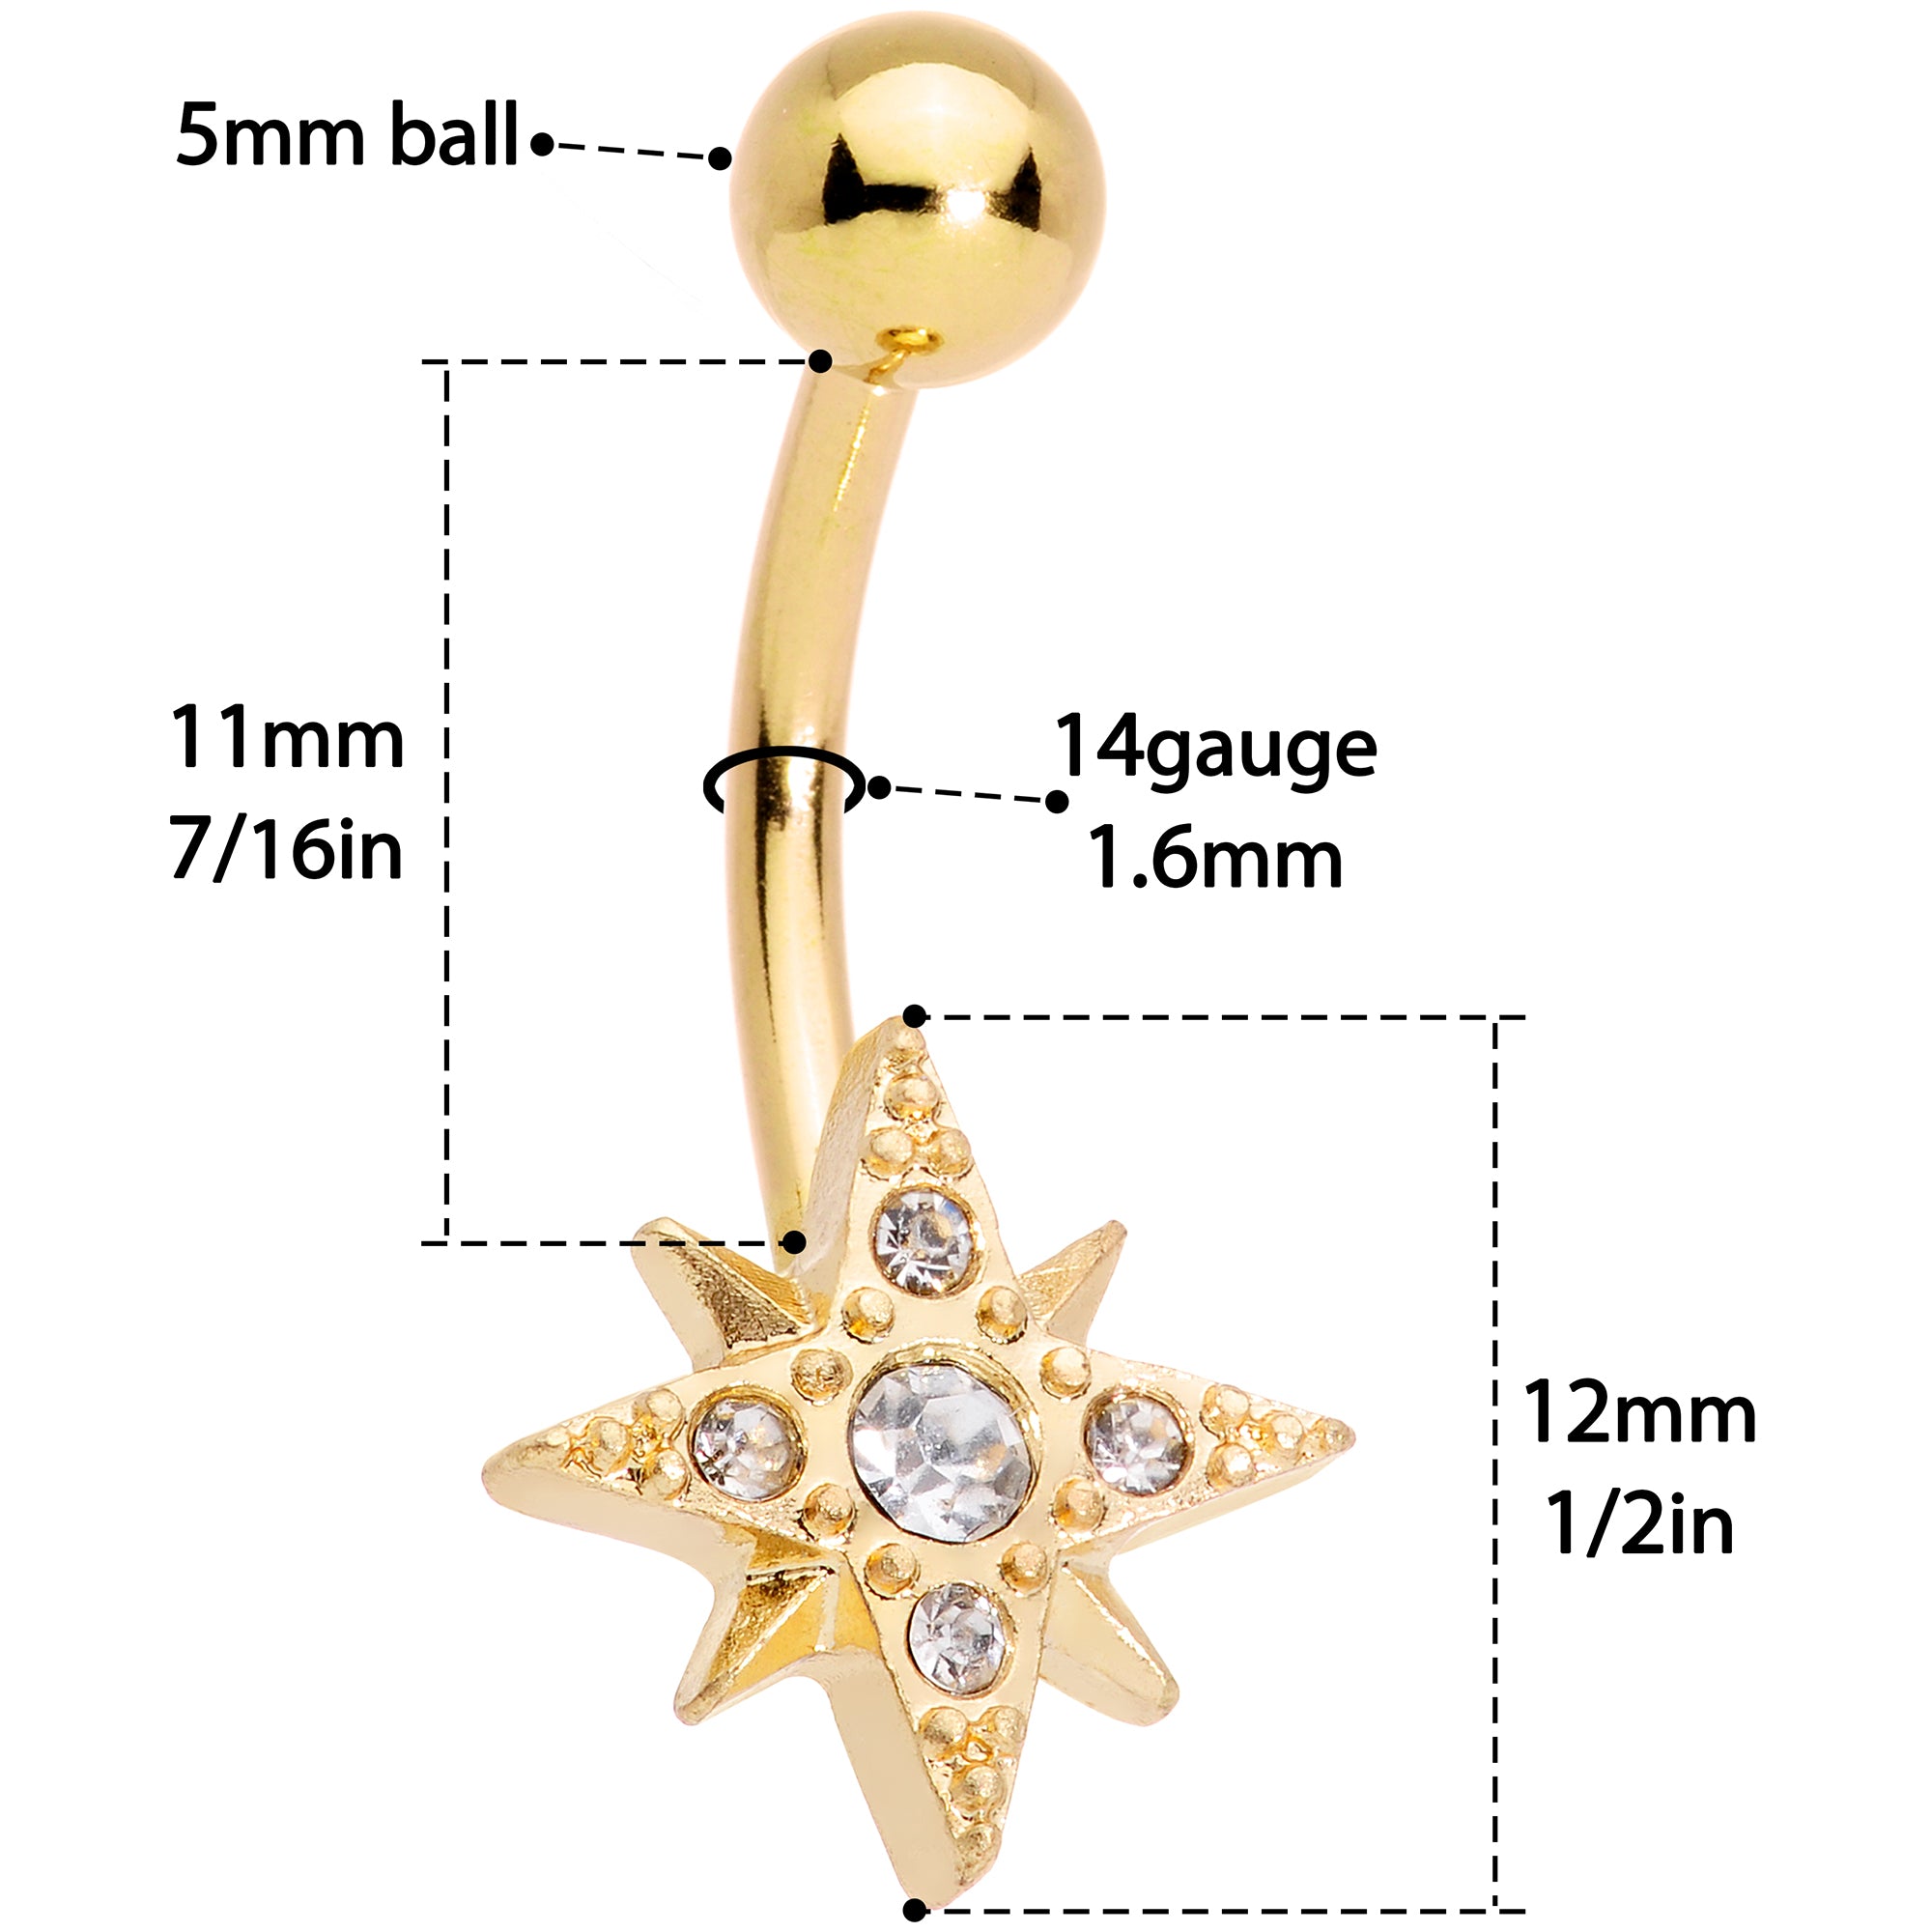 Clear Gem Gold Tone Celestial Moon Star Belly Ring Set of 3